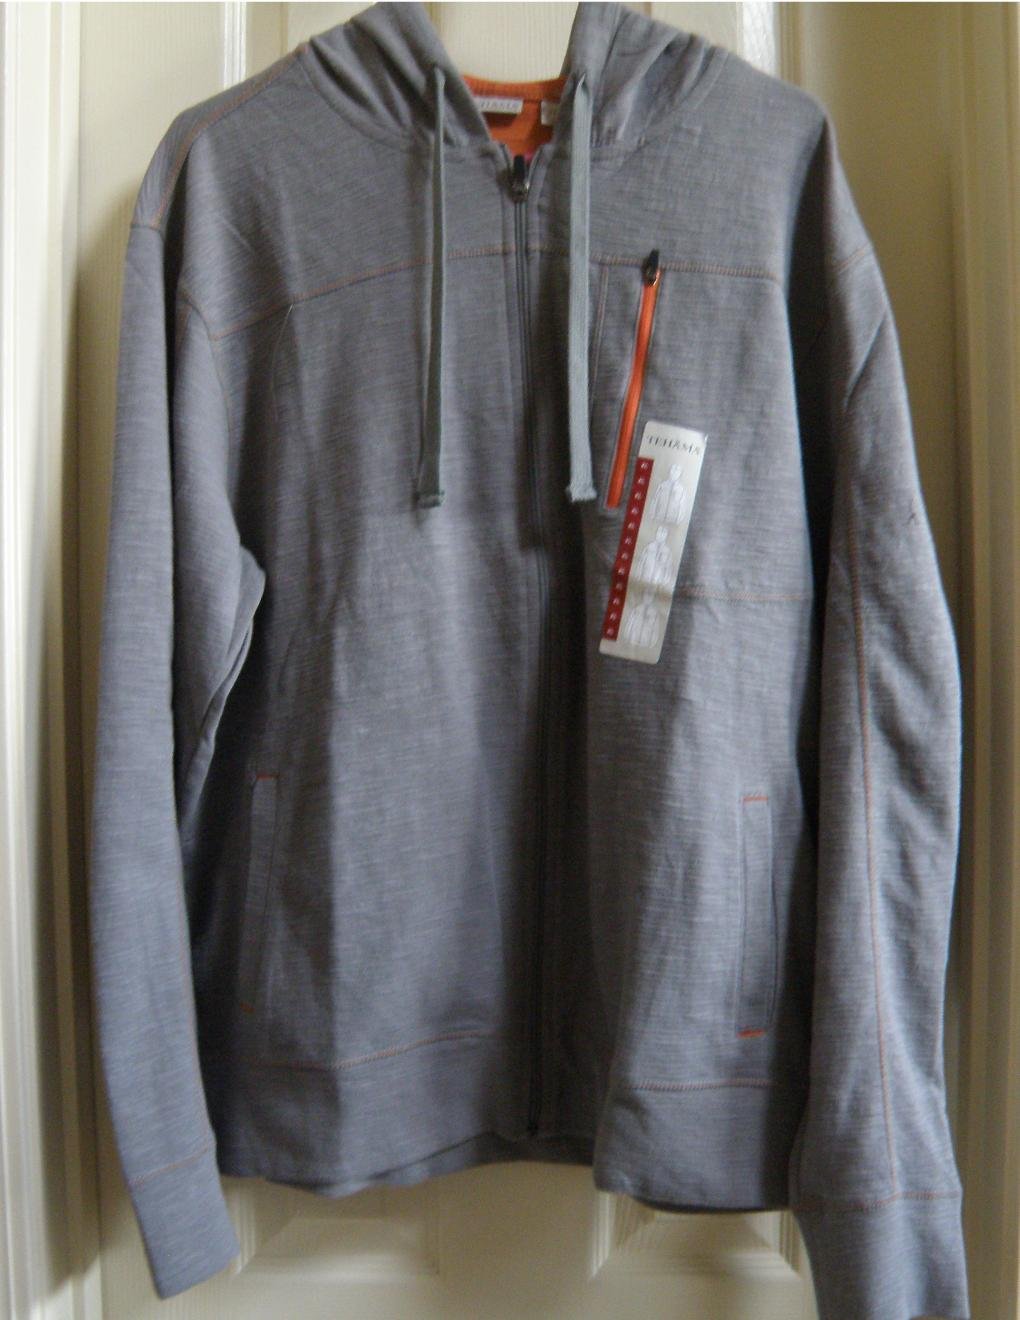 Mens Tehama Hoodie Hooded Jacket in Gray Size Extra Large XL NEW $68